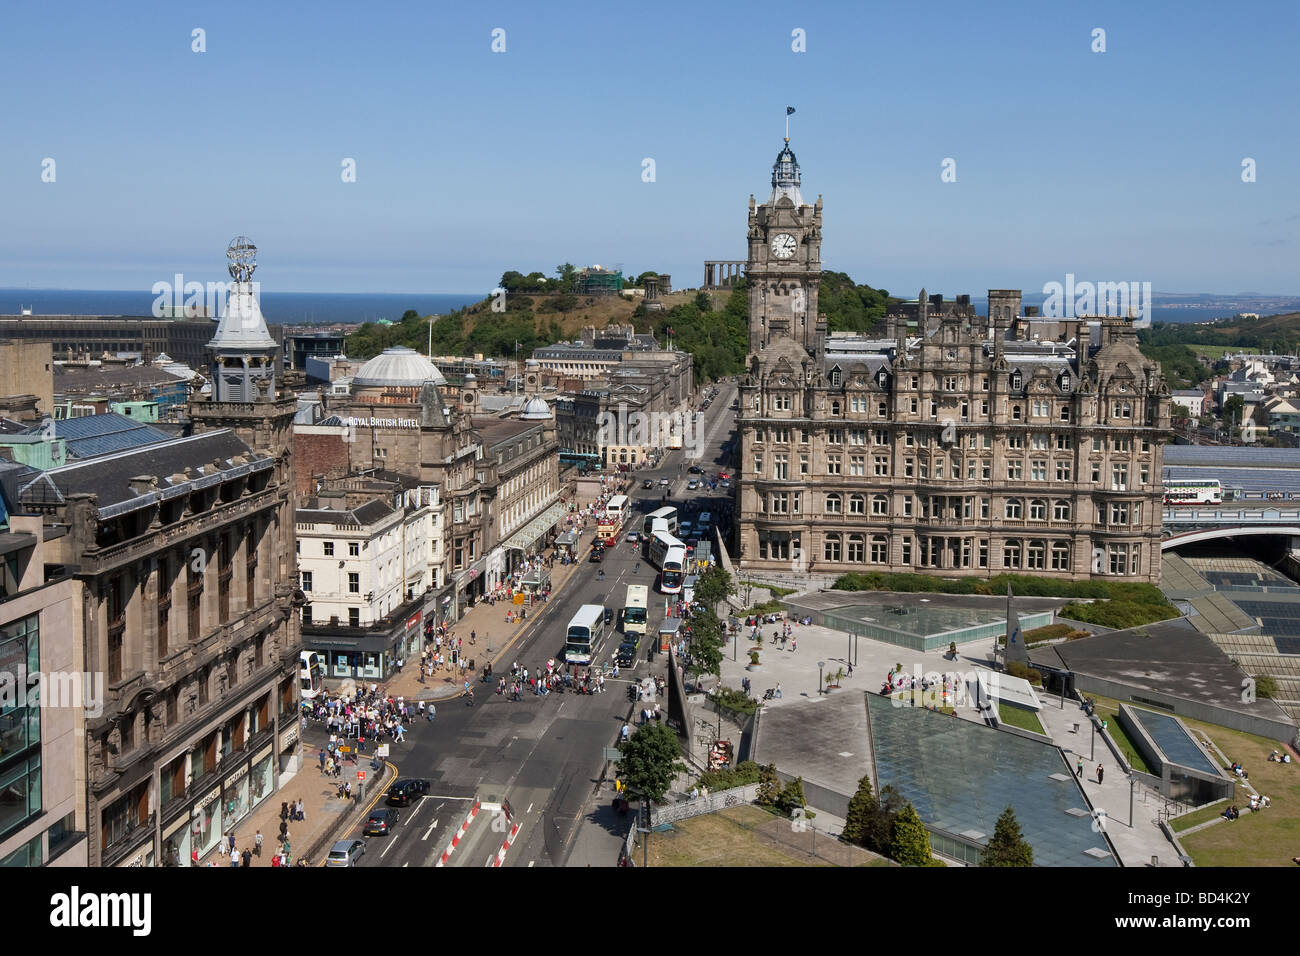 View from Scotts Monument looking down Princess Street towards the Balmoral Hotel and Calton Hill in Edinburgh Scotland Stock Photo